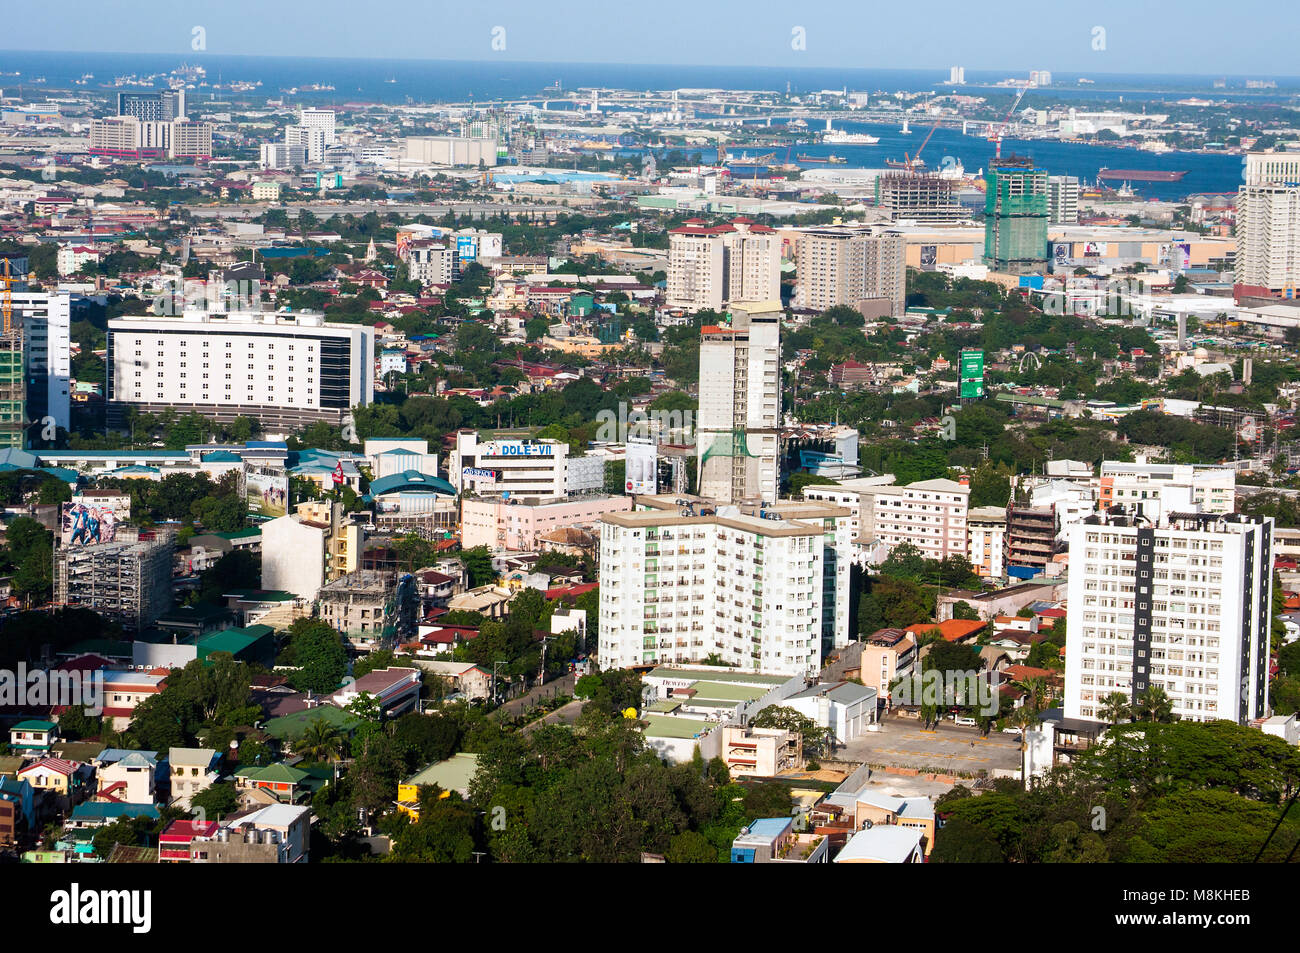 Aerial view of Cebu City looking east, with Mactan Island beyond, Philippines Stock Photo